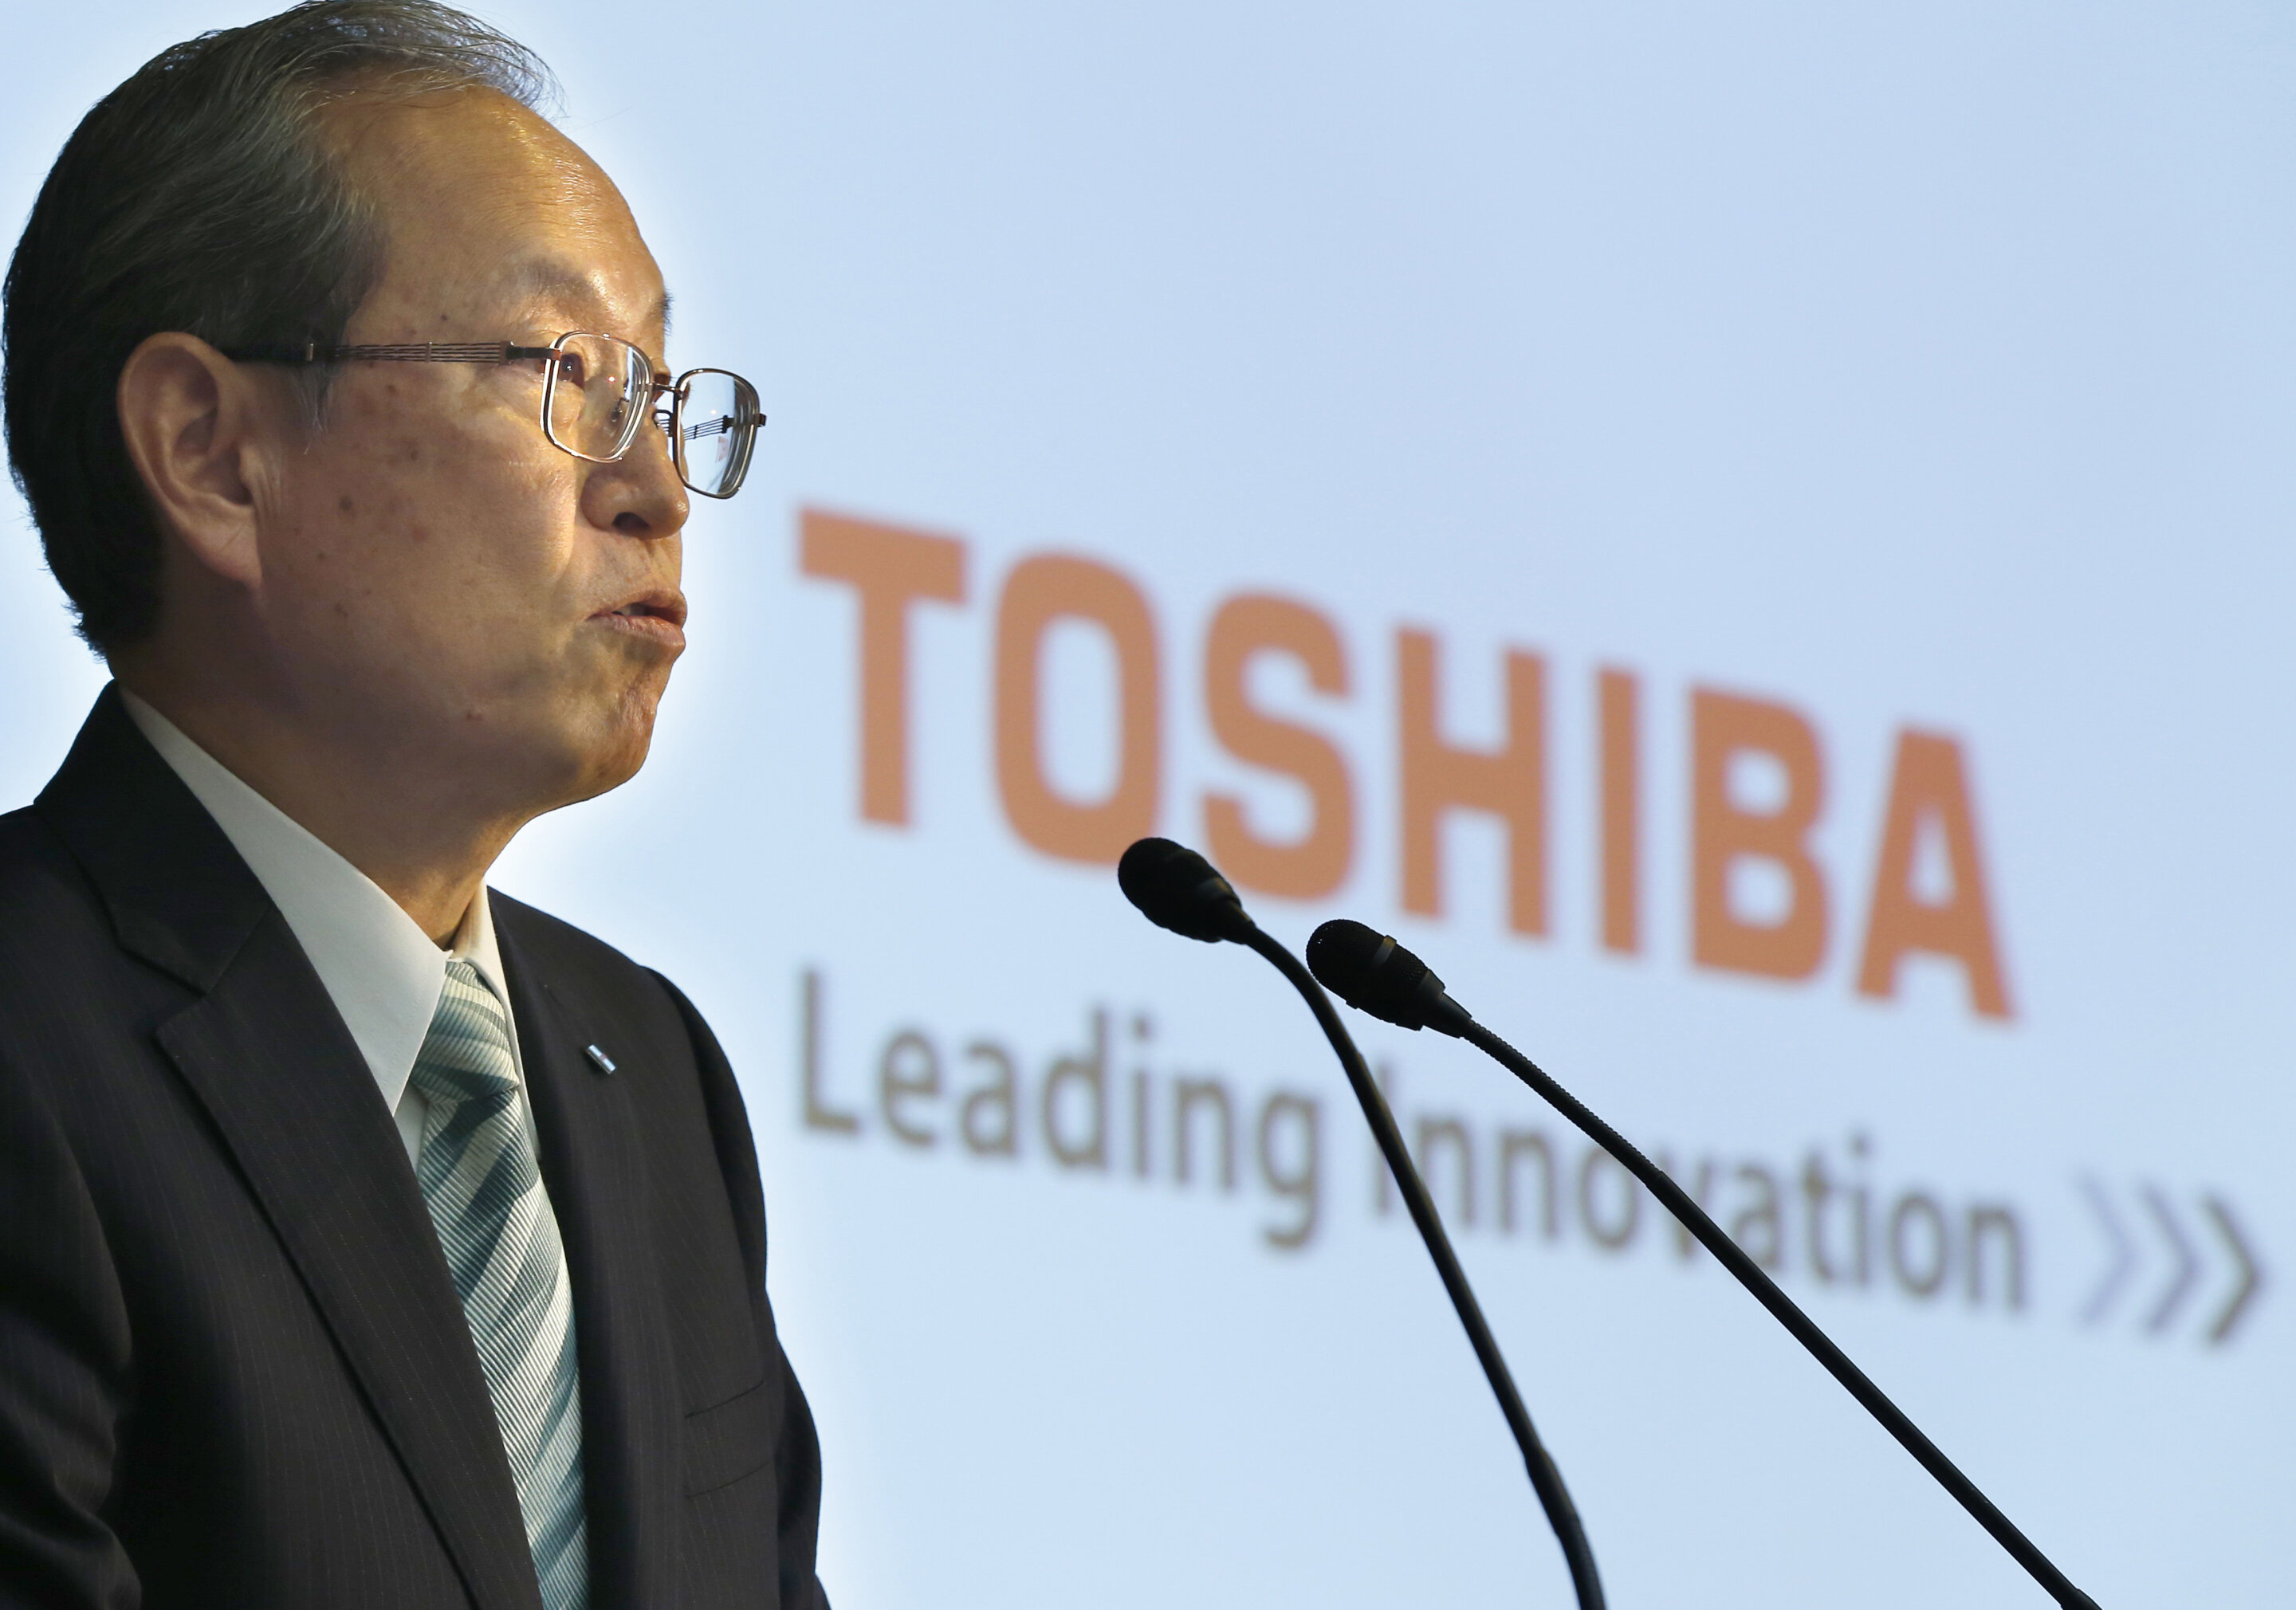 Japan’s Toshiba CEO steps down amid restructuring efforts